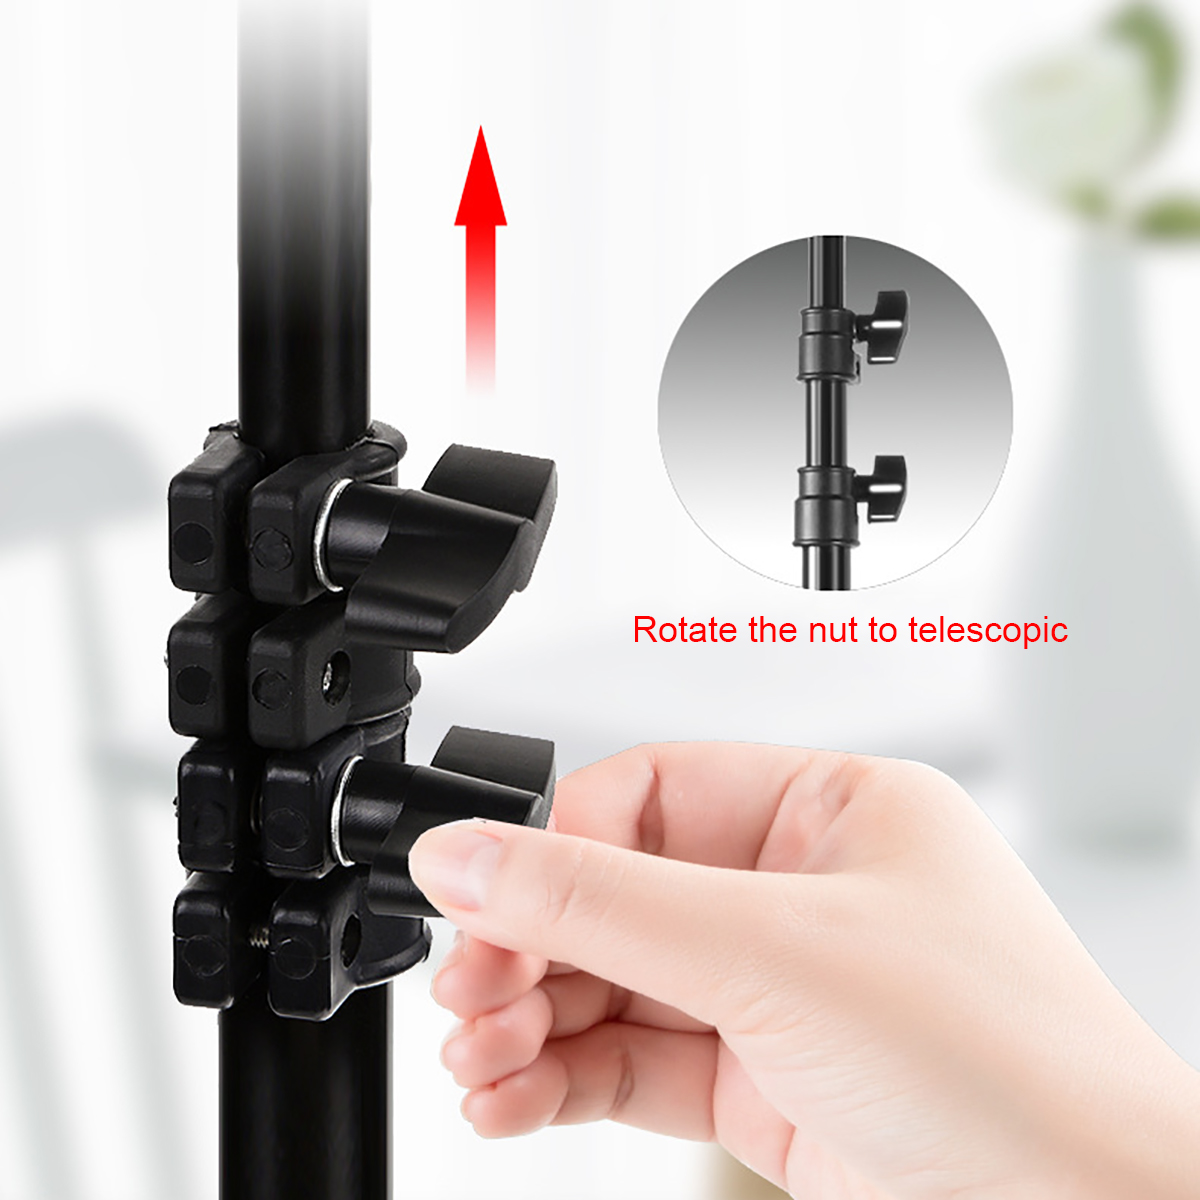 1625cm-Dimmable-LED-Video-Ring-Light-Tripod-Stand-with-PhoneMic-Holder-bluetooth-Selfie-Shutter-for--1610611-3